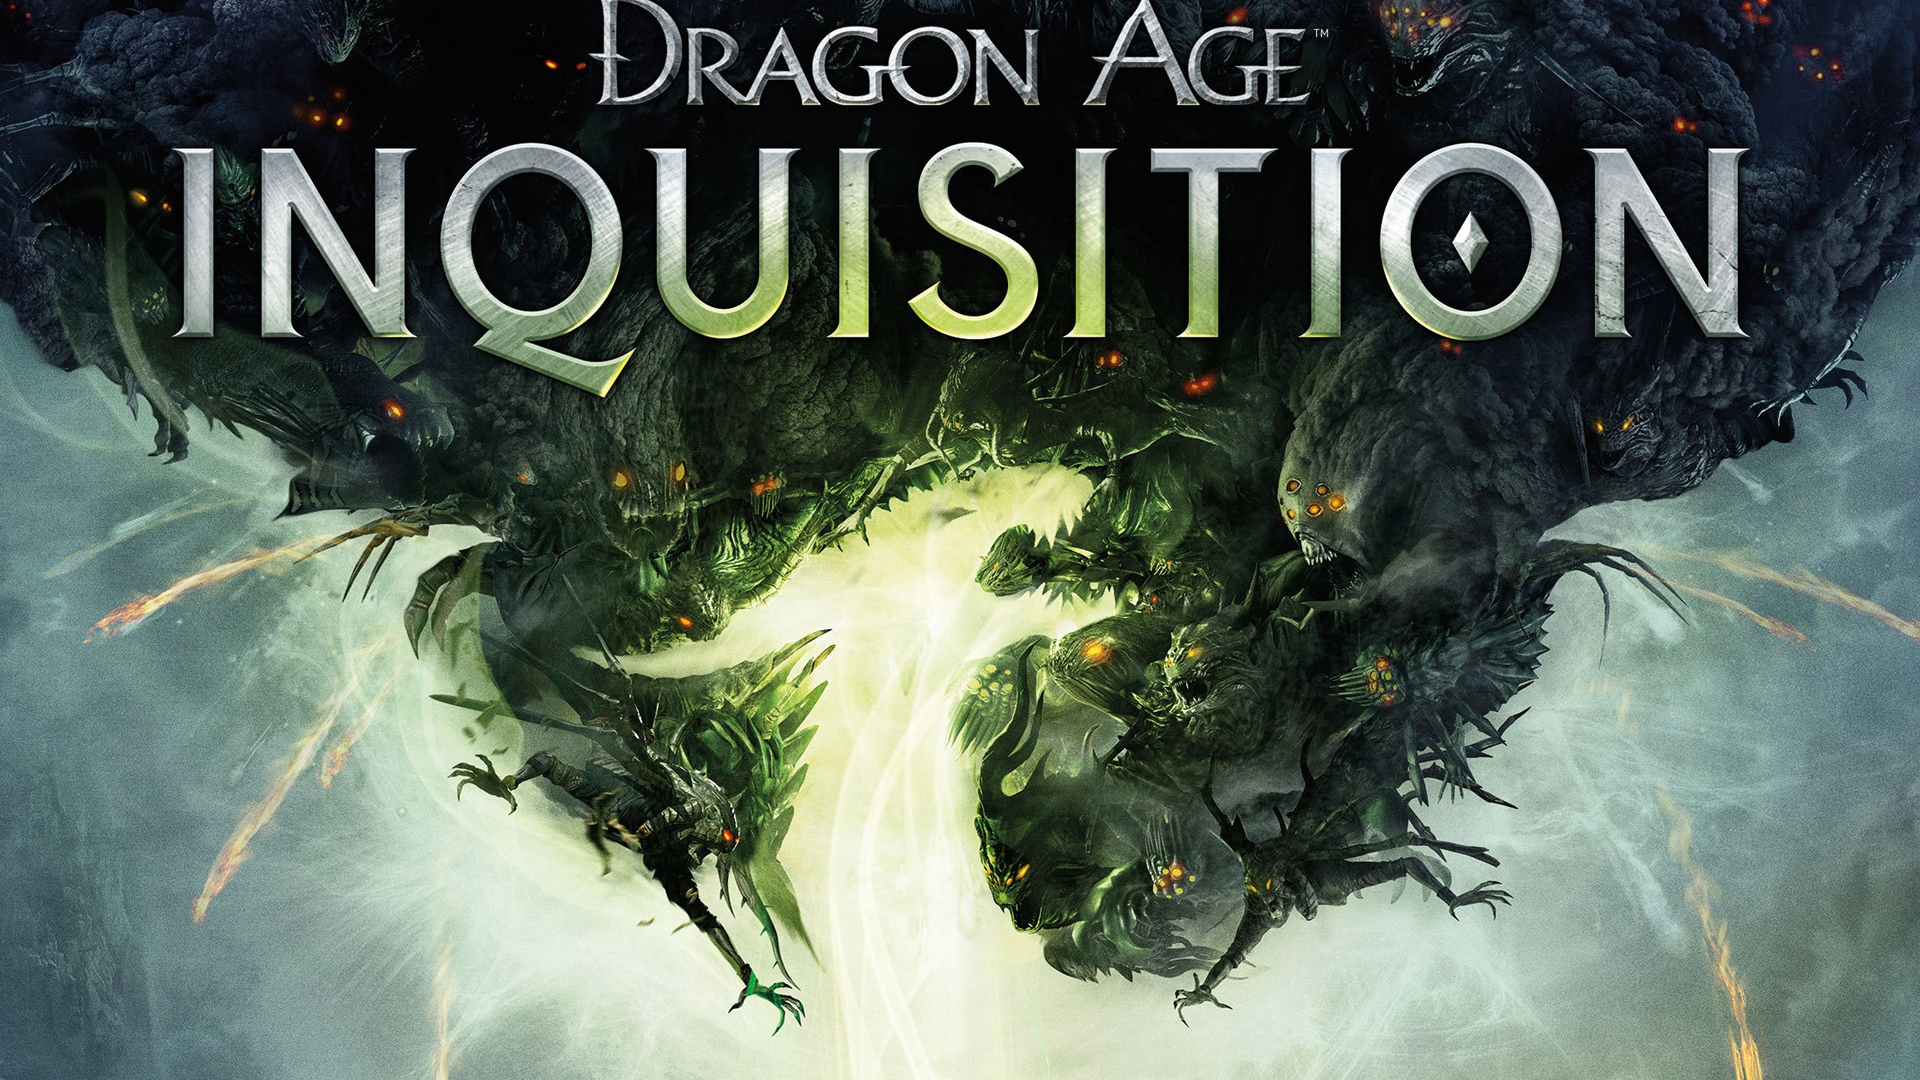 Dragon Age Inquisition Game for 1920 x 1080 HDTV 1080p resolution